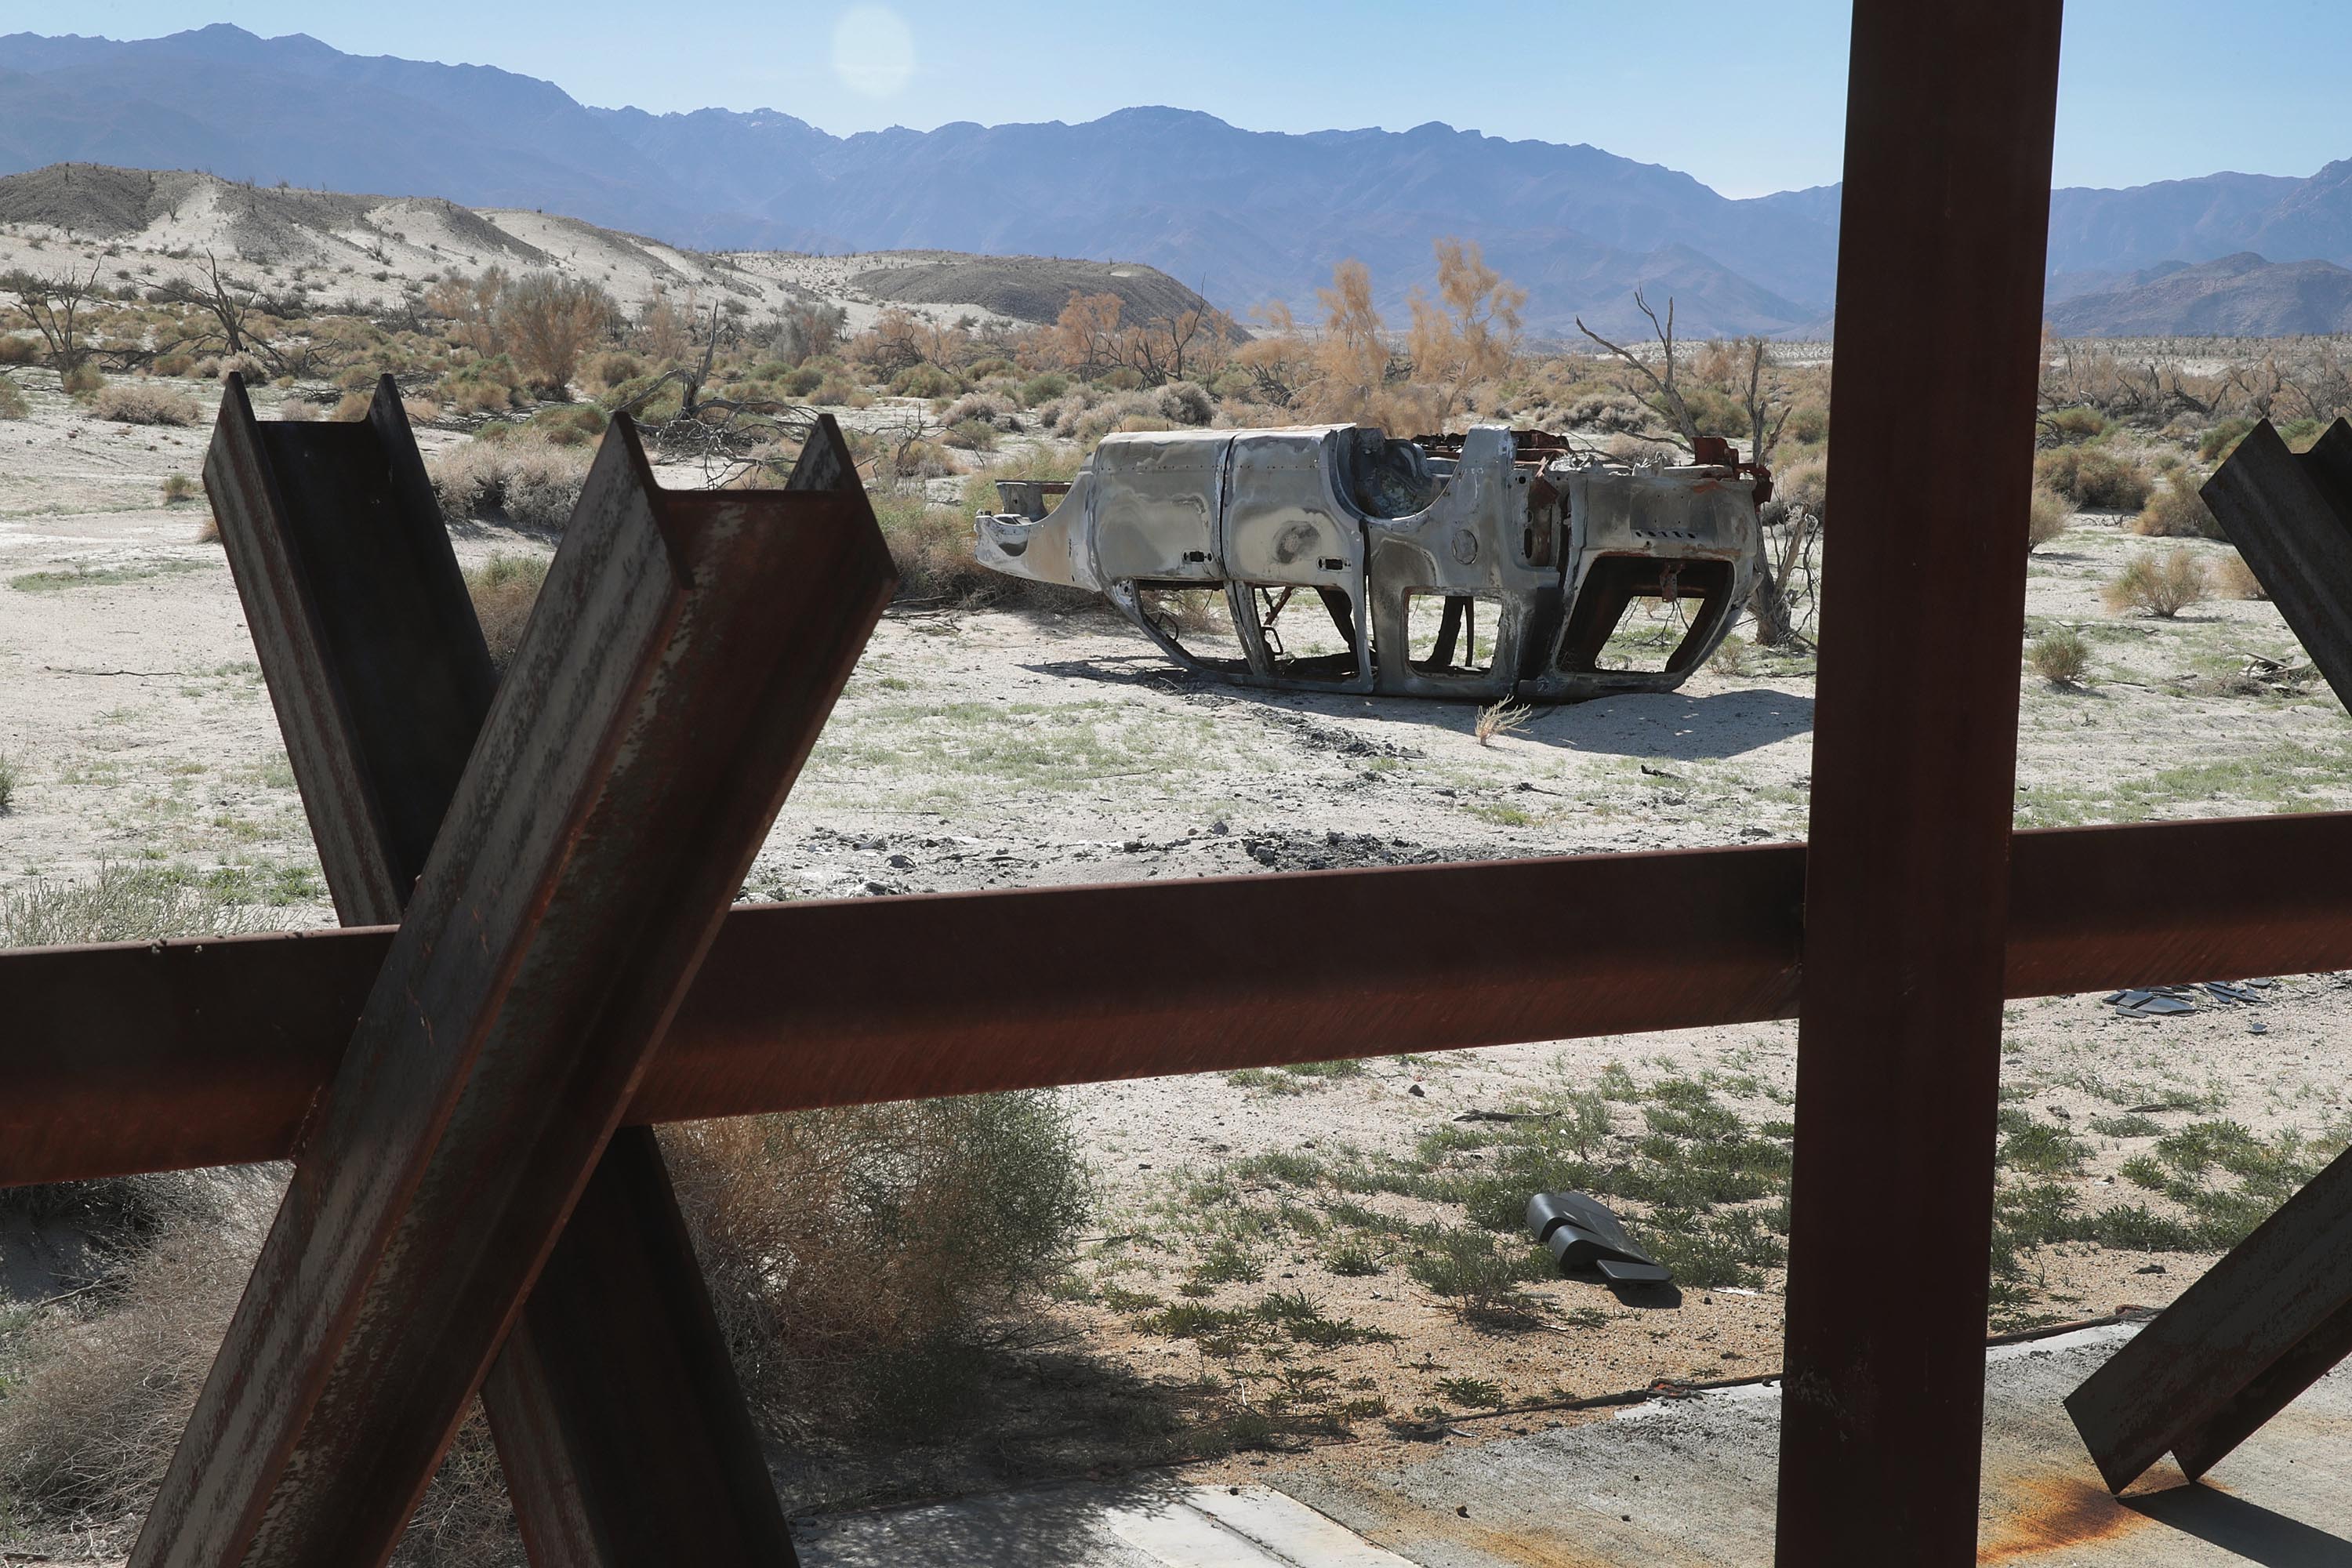 CALEXICO, CALIFORNIA - JANUARY 26: The remains of a vehicle rest on the ground near a barrier which runs along the border of the United States and Mexico on January 26, 2019 near Calexico, California. The U.S. government had been partially shut down as President Donald Trump battled congress for $5.7 billion in funding to resolve border security issues including building walls along the border. Yesterday, President Trump agreed to end the shutdown. (Photo by Scott Olson/Getty Images)